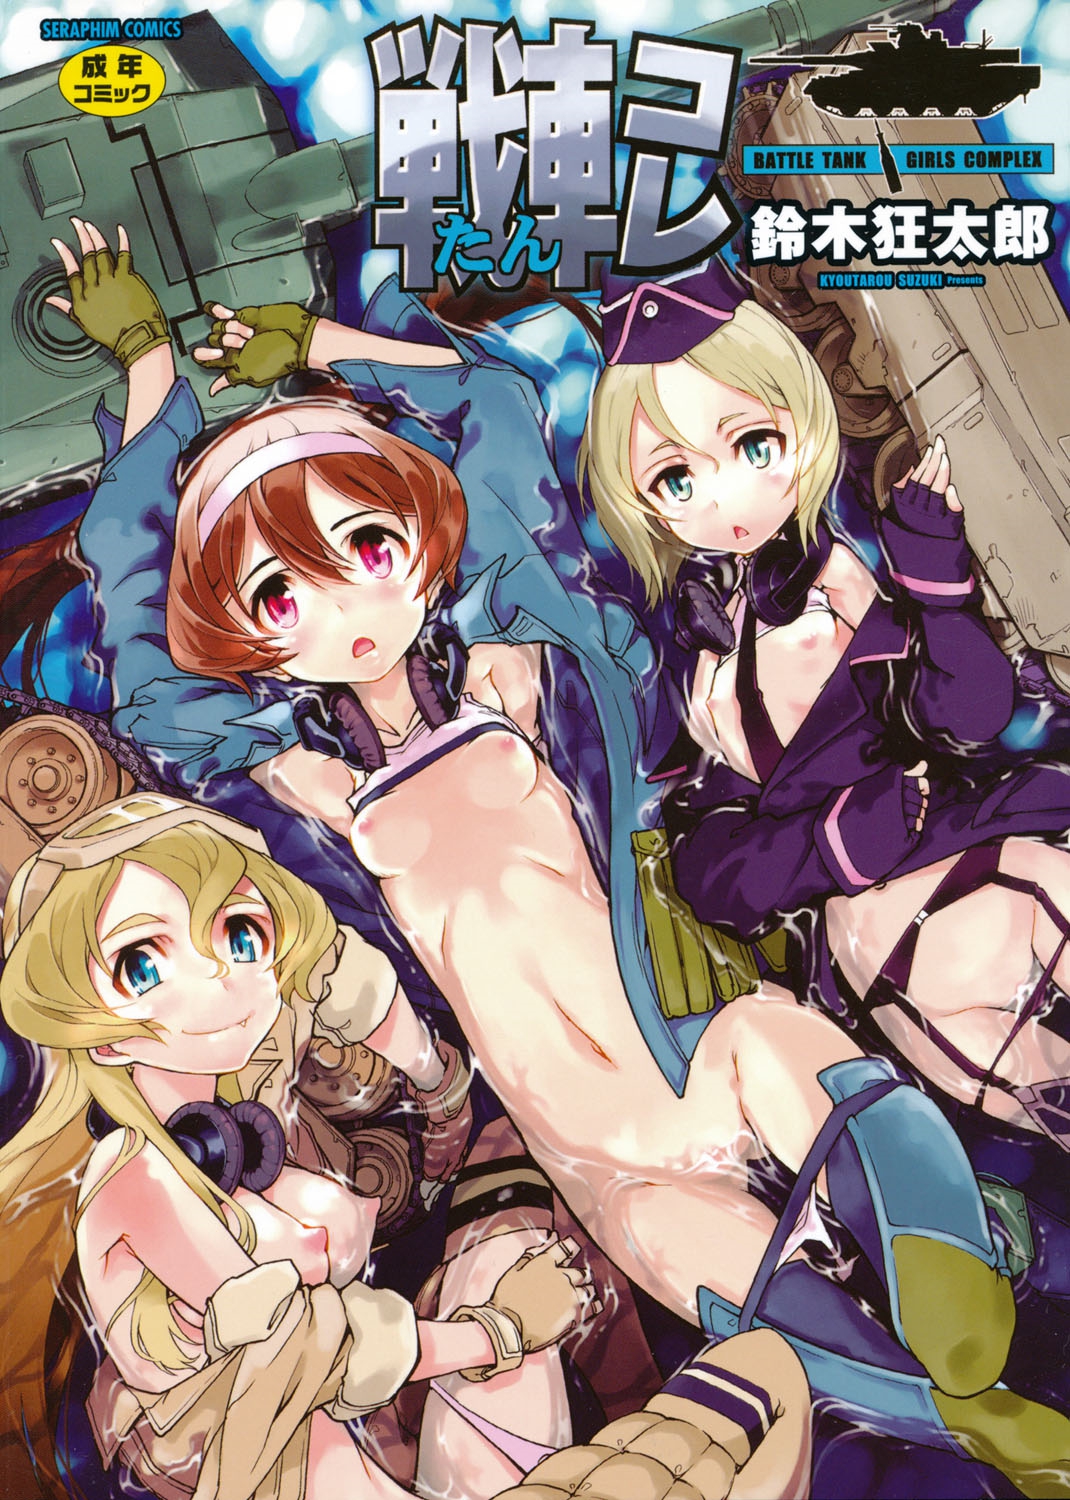 Tank Girl Anime Porn - Tancolle - Battle Tank Girls Complex - Page 1 - HentaiEra